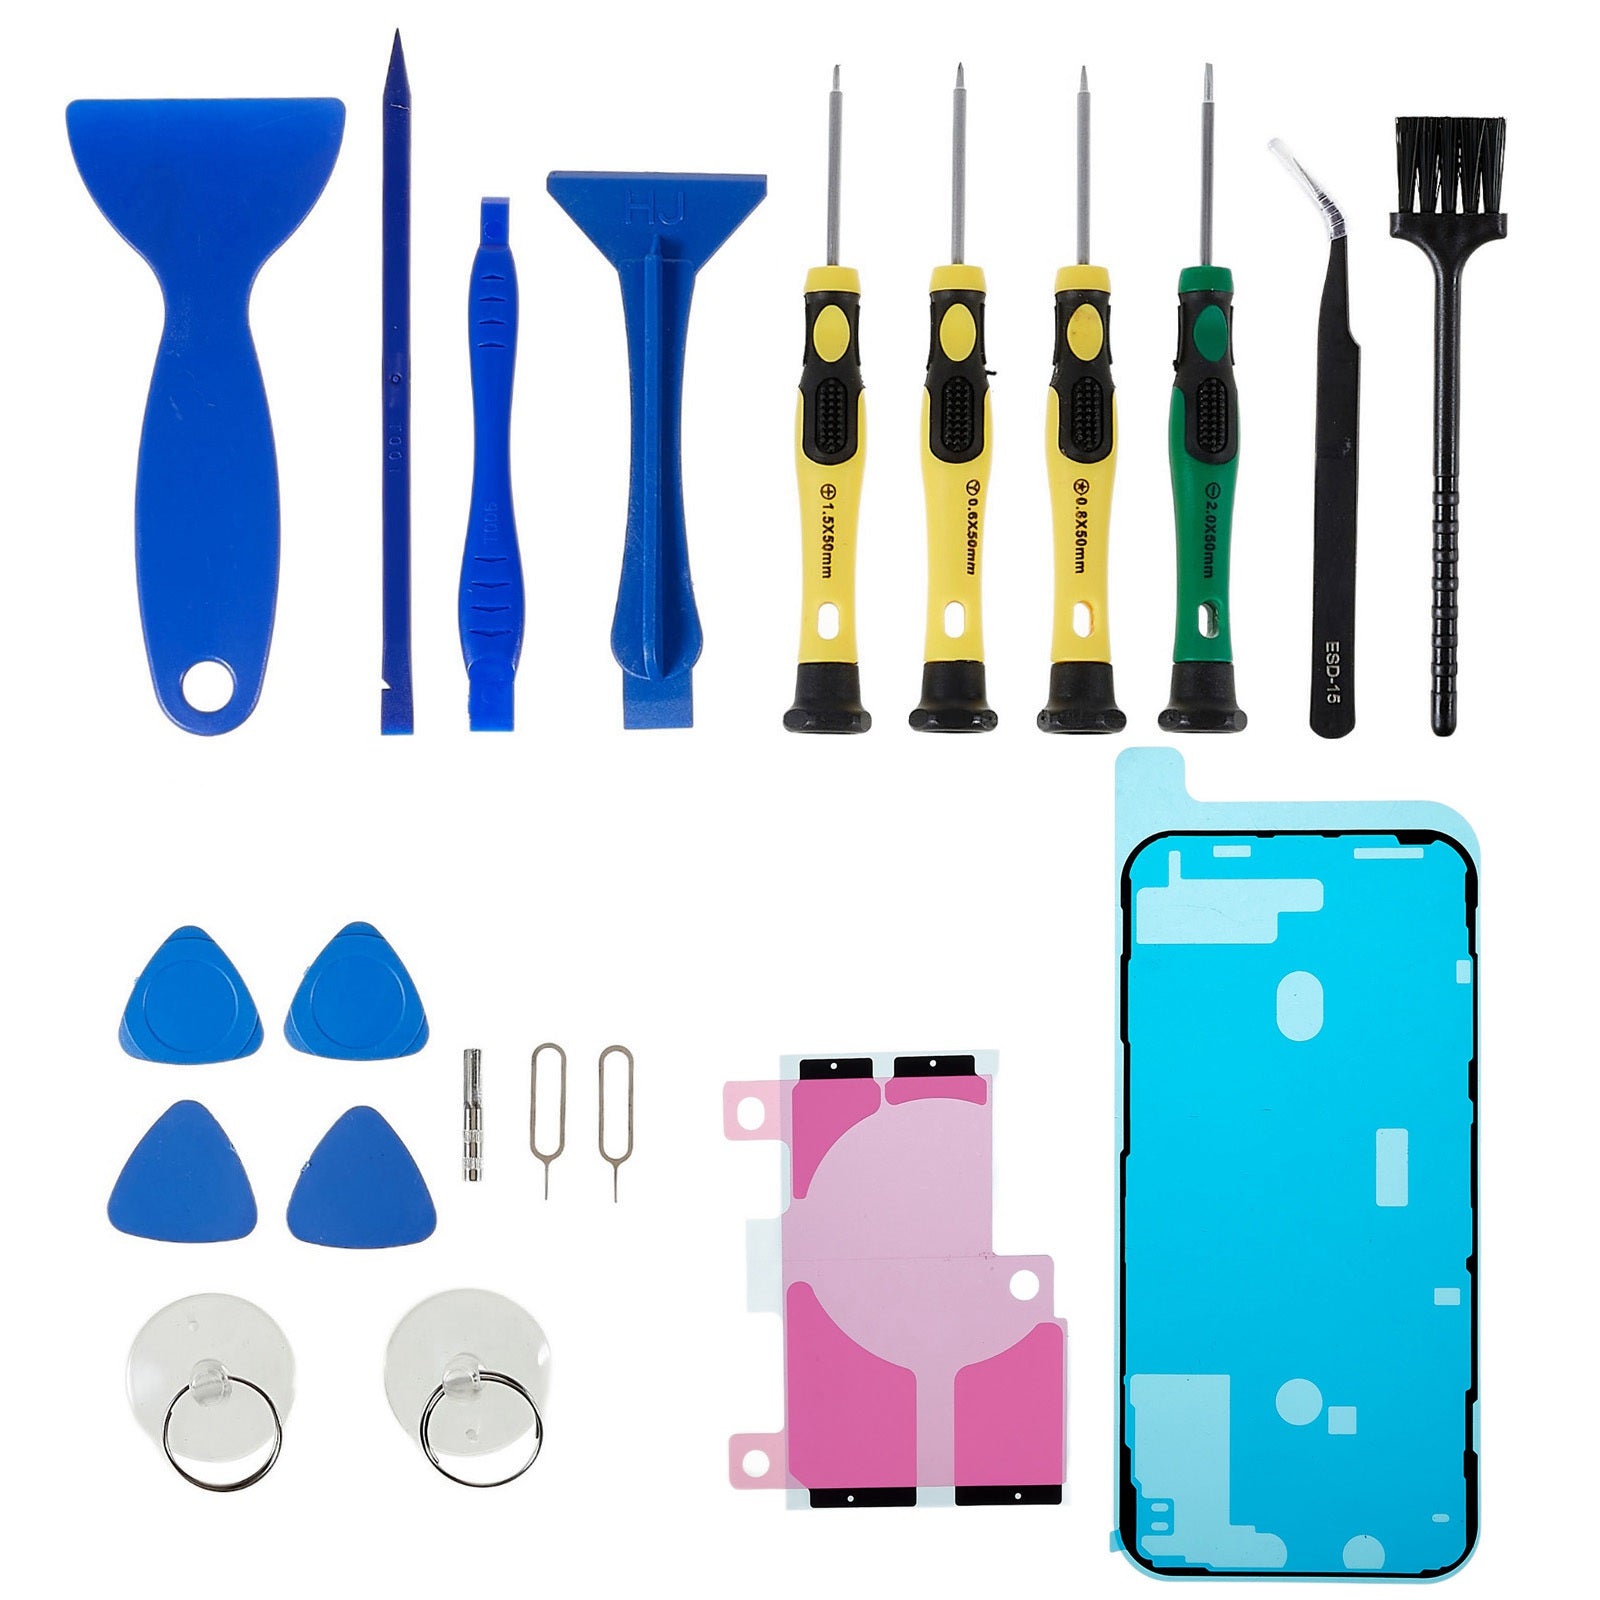 JF-8182 21-in-1 Cellphone Repair Tool Kit for iPhone 12 Pro Max 6.7 inch Replacement Parts Battery Adhesive Tape Sticker + Middle Plate Frame Waterproof Adhesive Sticker, Portable Precision Screwdriver Set Opening Pry Tools